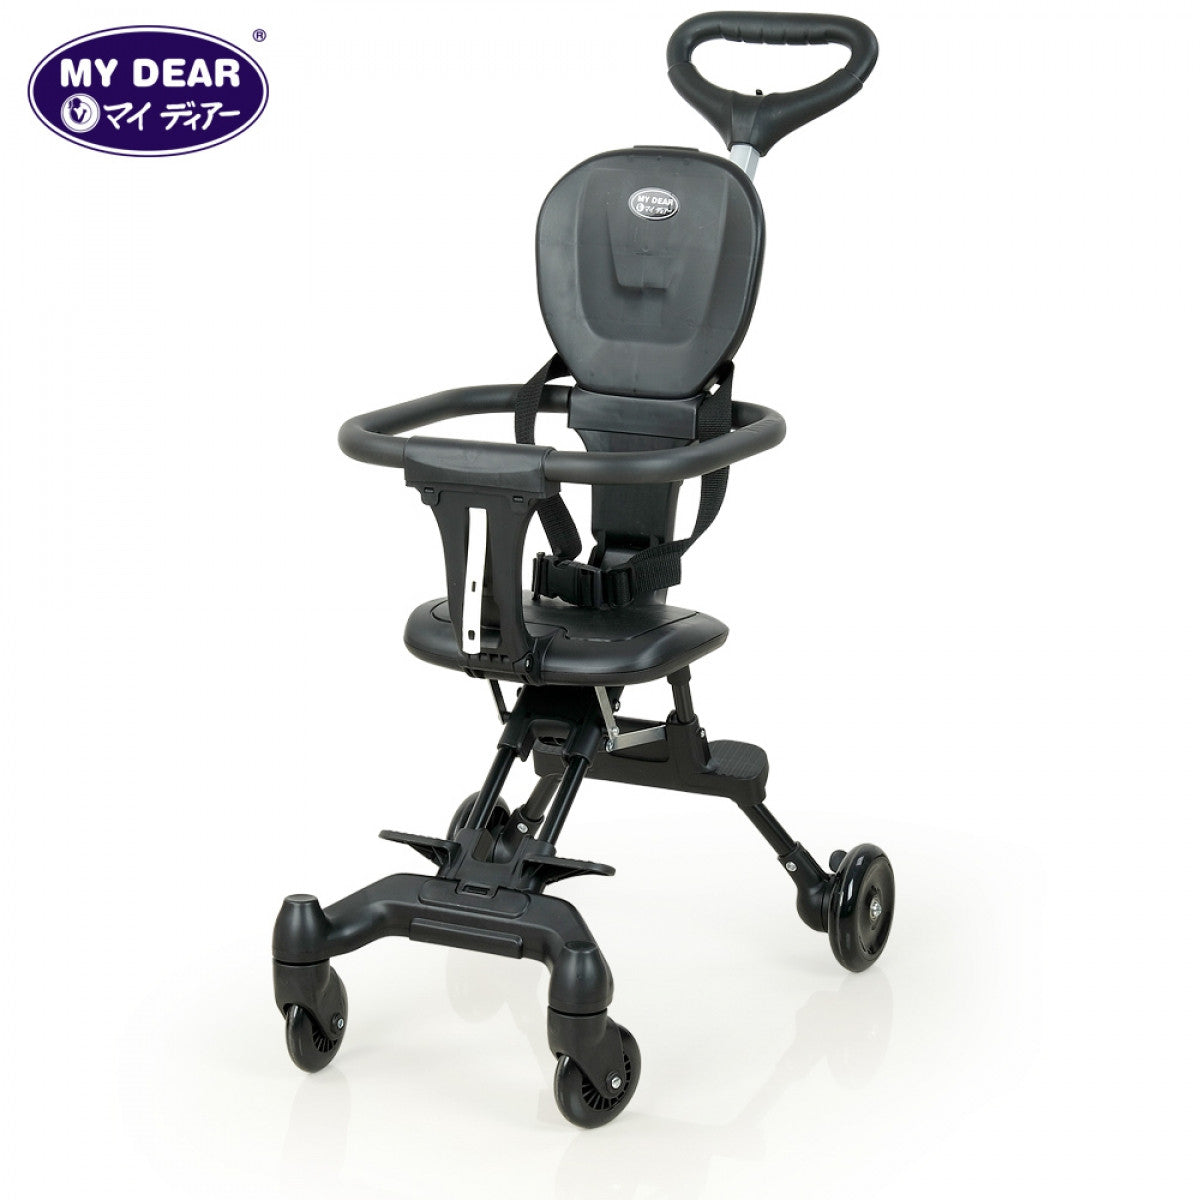 My Dear Magic Baby Stroller 18126 With Reversible Seat